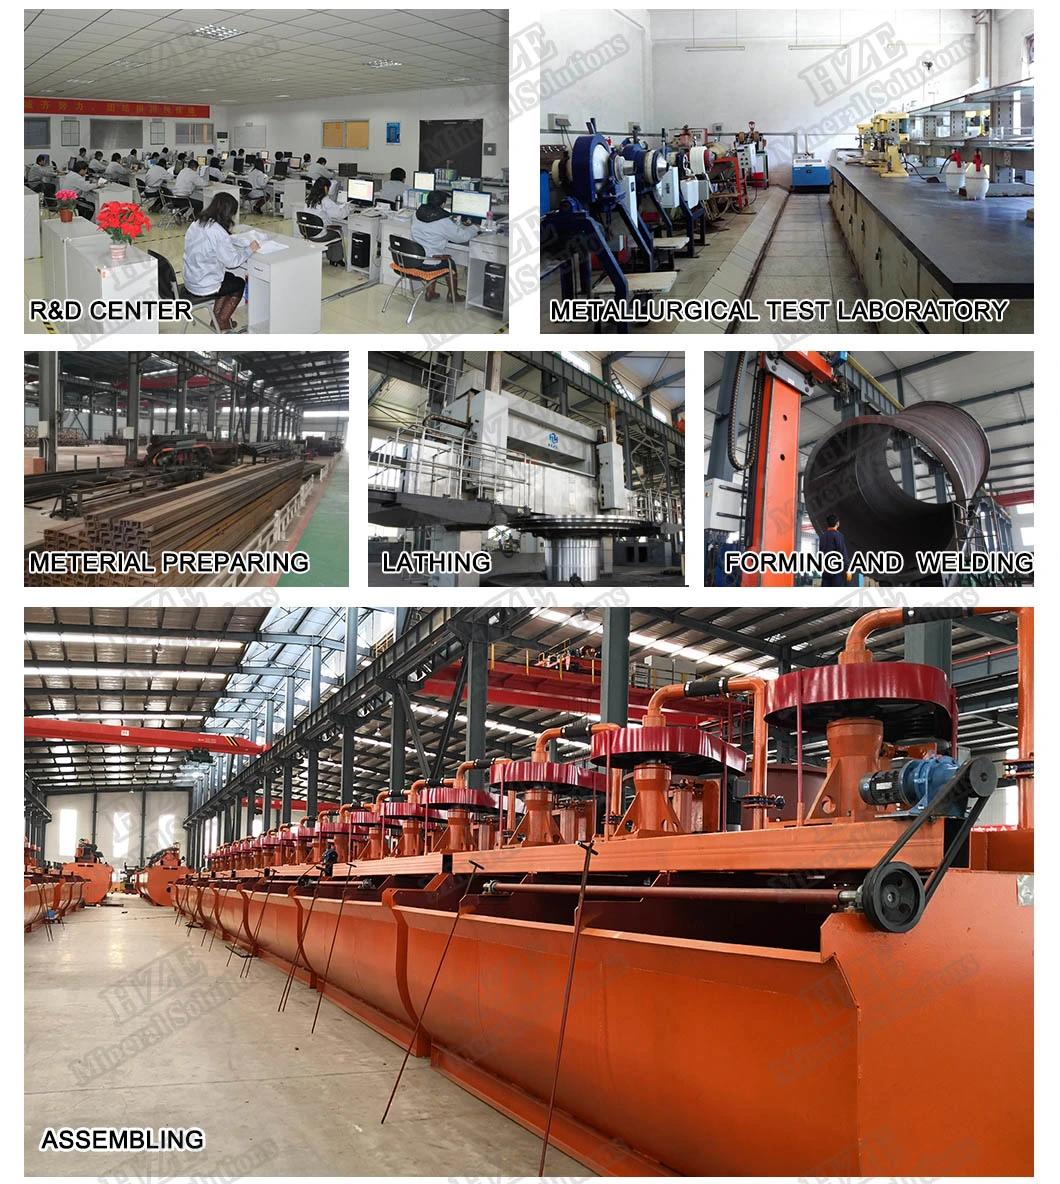 Hard Rock Crushing Equipment Jaw Crusher of Mineral Processing Plant